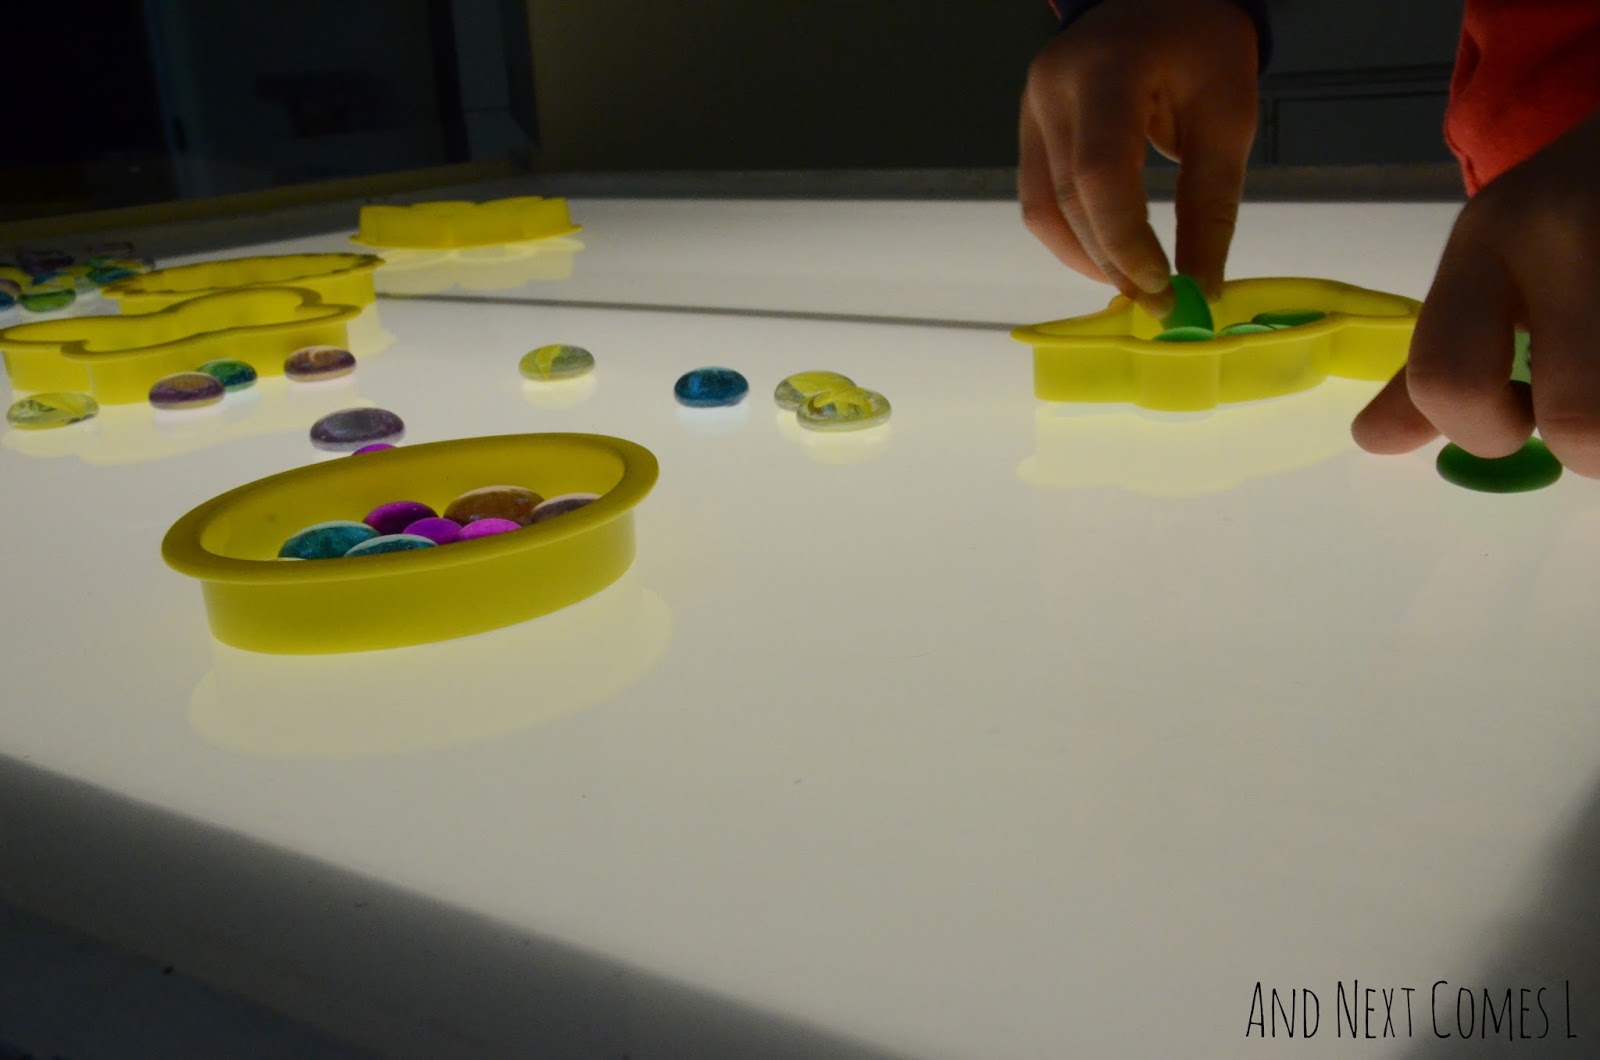 A simple light table idea for Easter and Spring